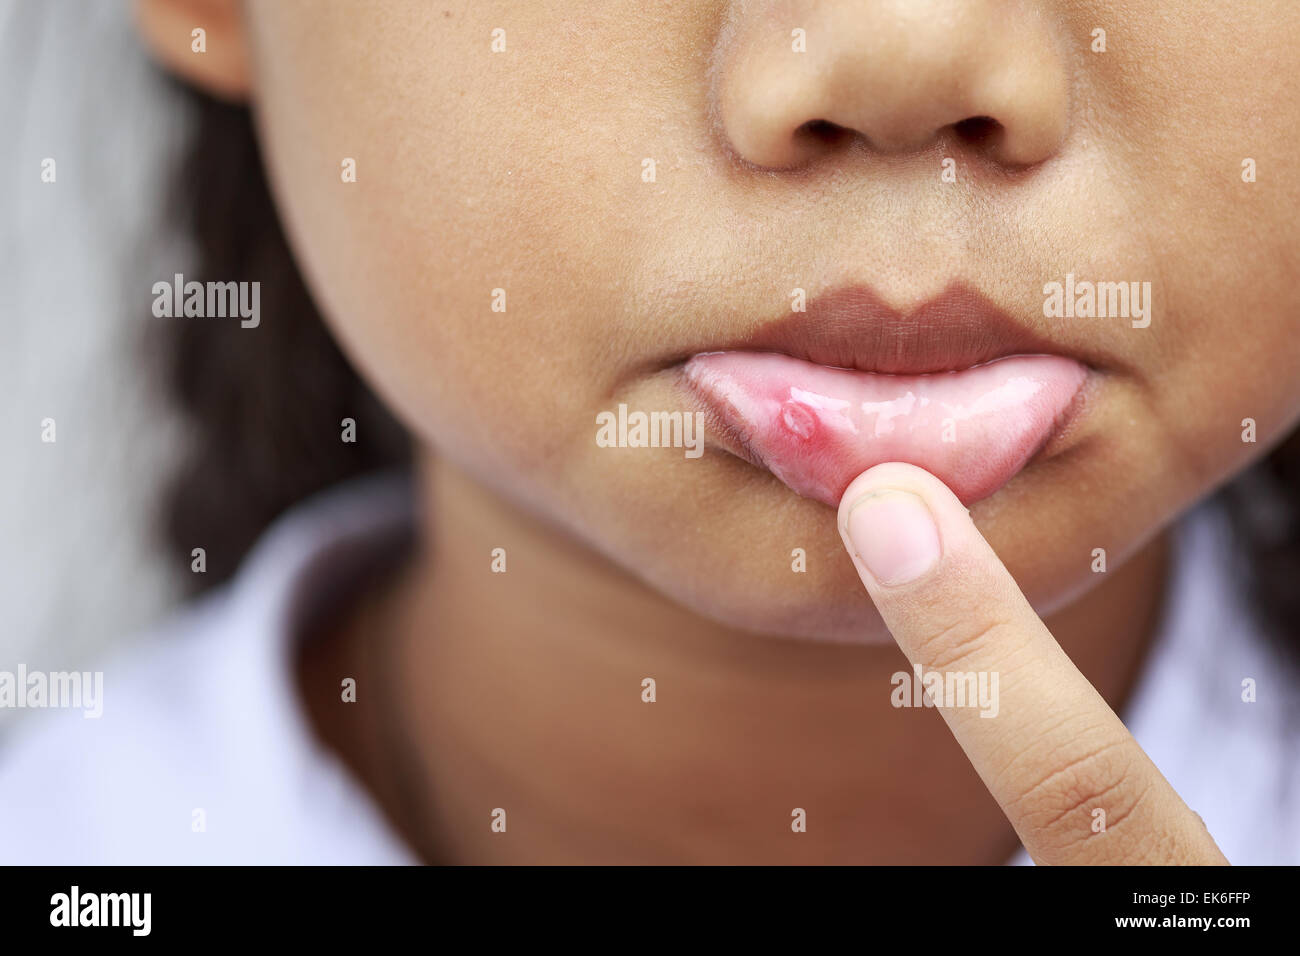 Close up Children with aphtha on lip Stock Photo